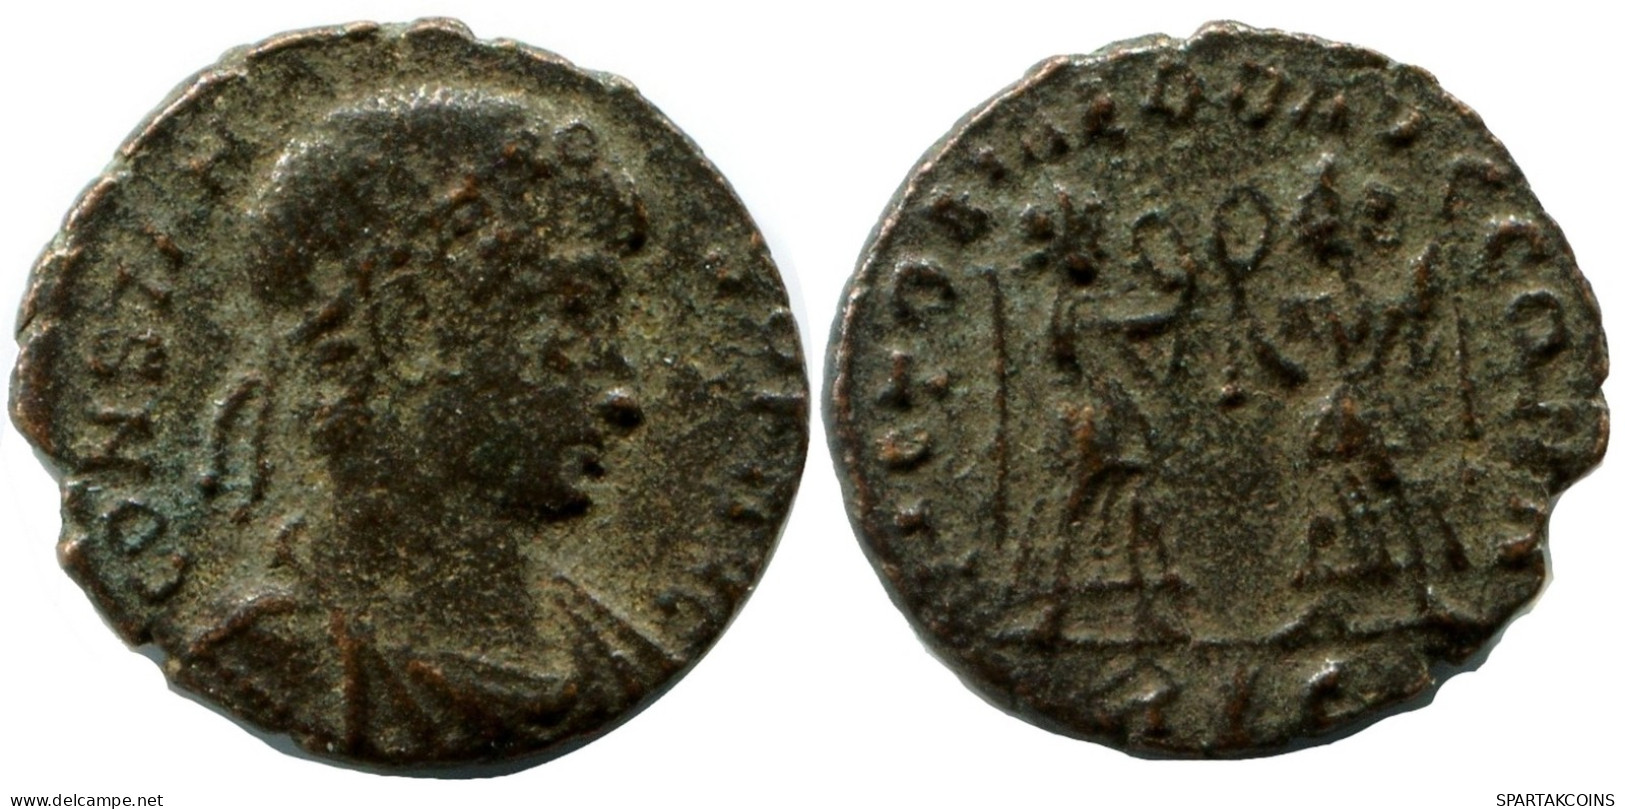 CONSTANS MINTED IN ROME ITALY FROM THE ROYAL ONTARIO MUSEUM #ANC11541.14.E.A - El Imperio Christiano (307 / 363)